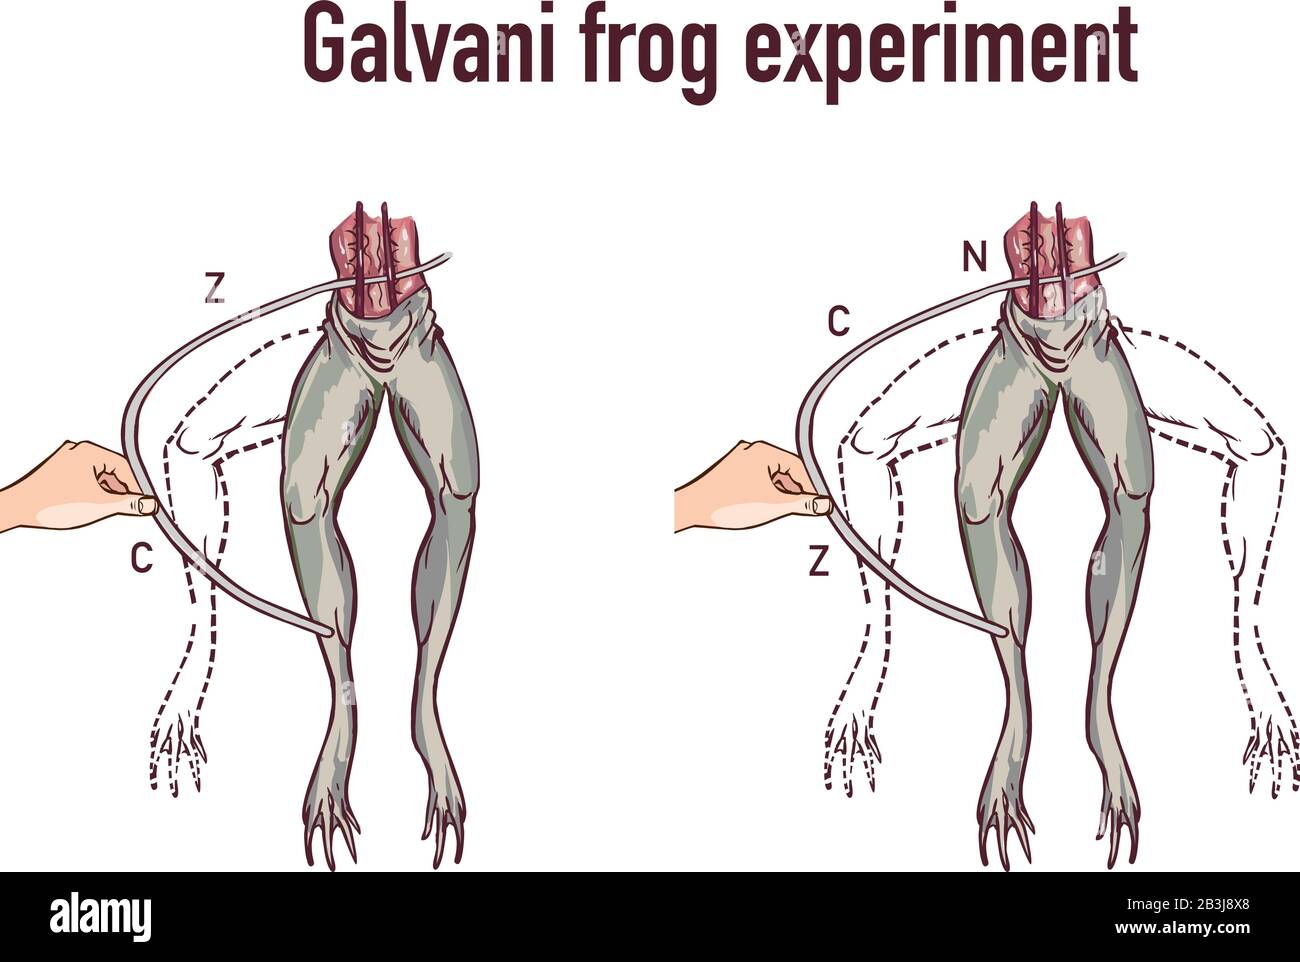 Galvani experiment with frog legs vector illustration Stock Vector